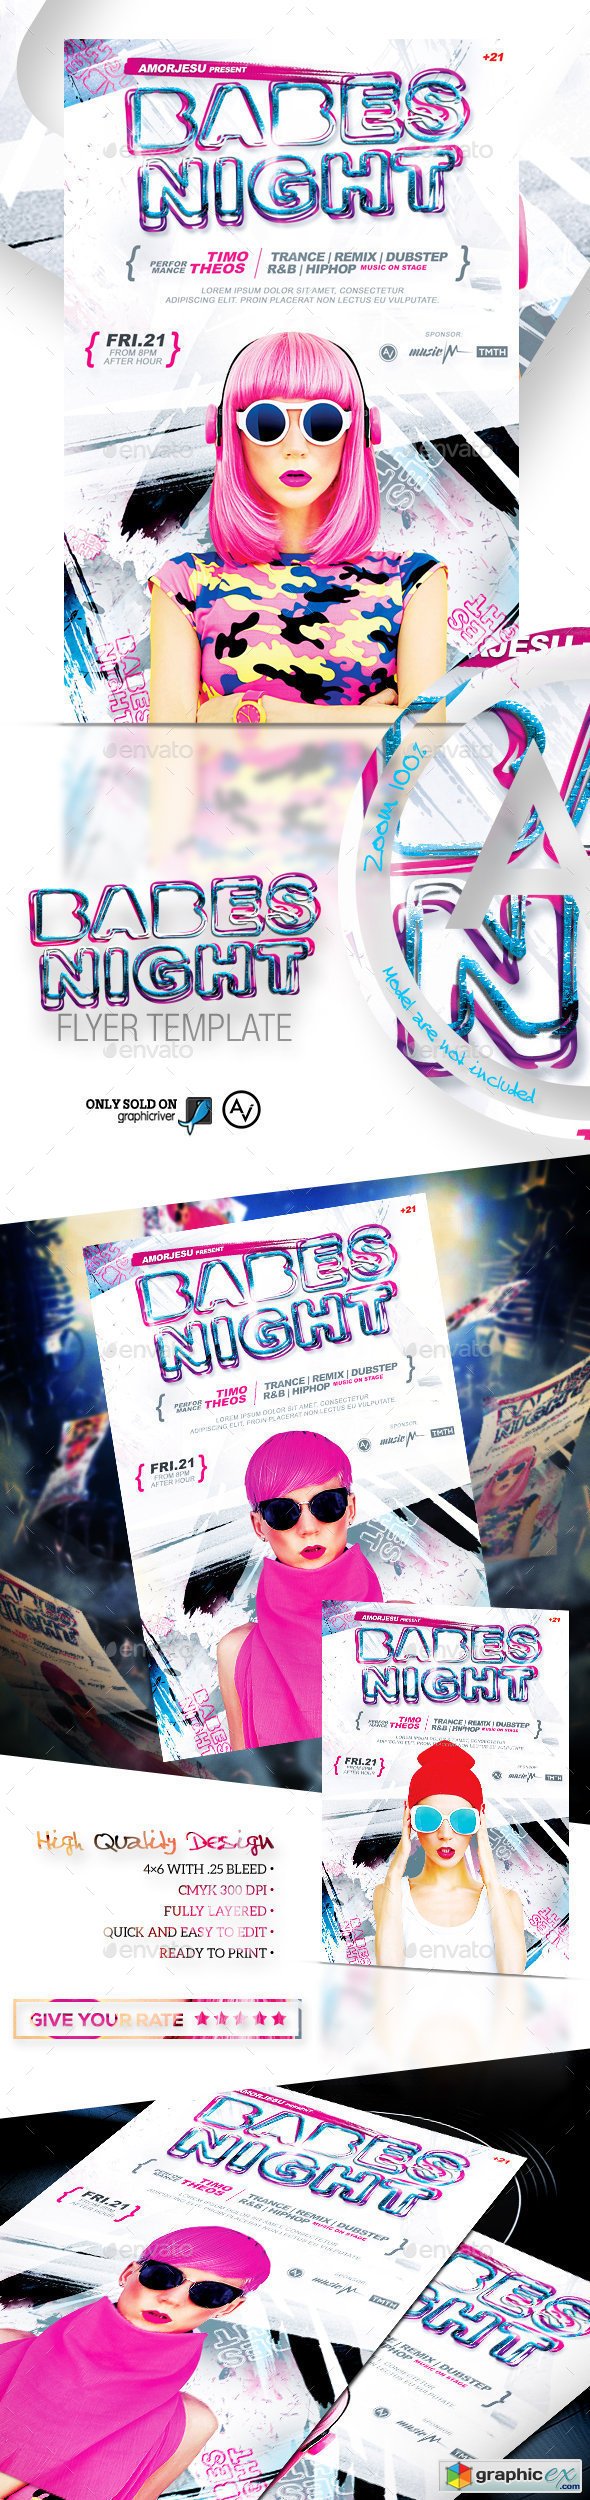 Babes Night Flyer Template